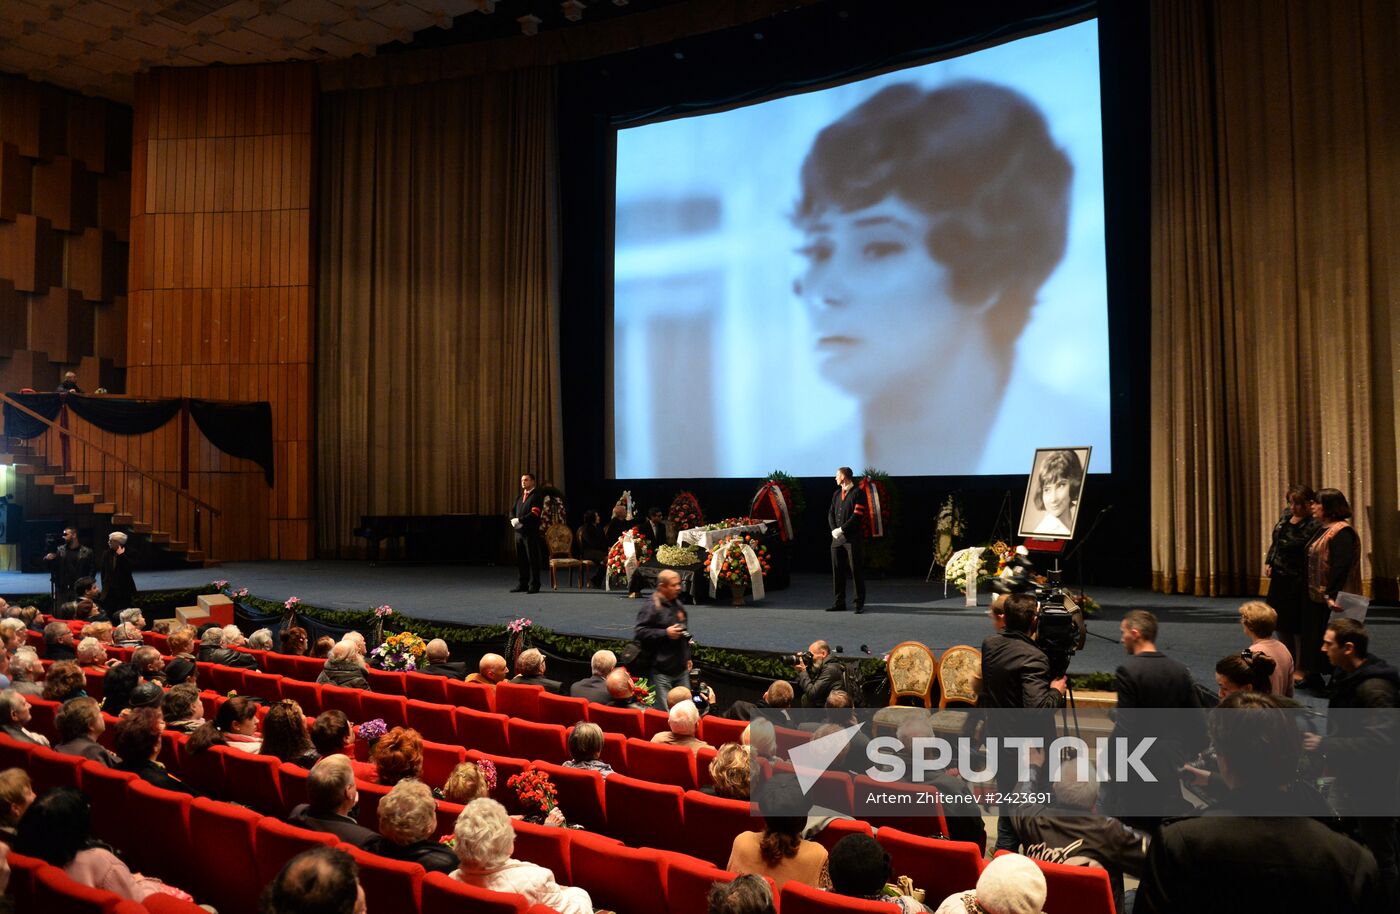 People pay their last respects to actress Tatyana Samoliova